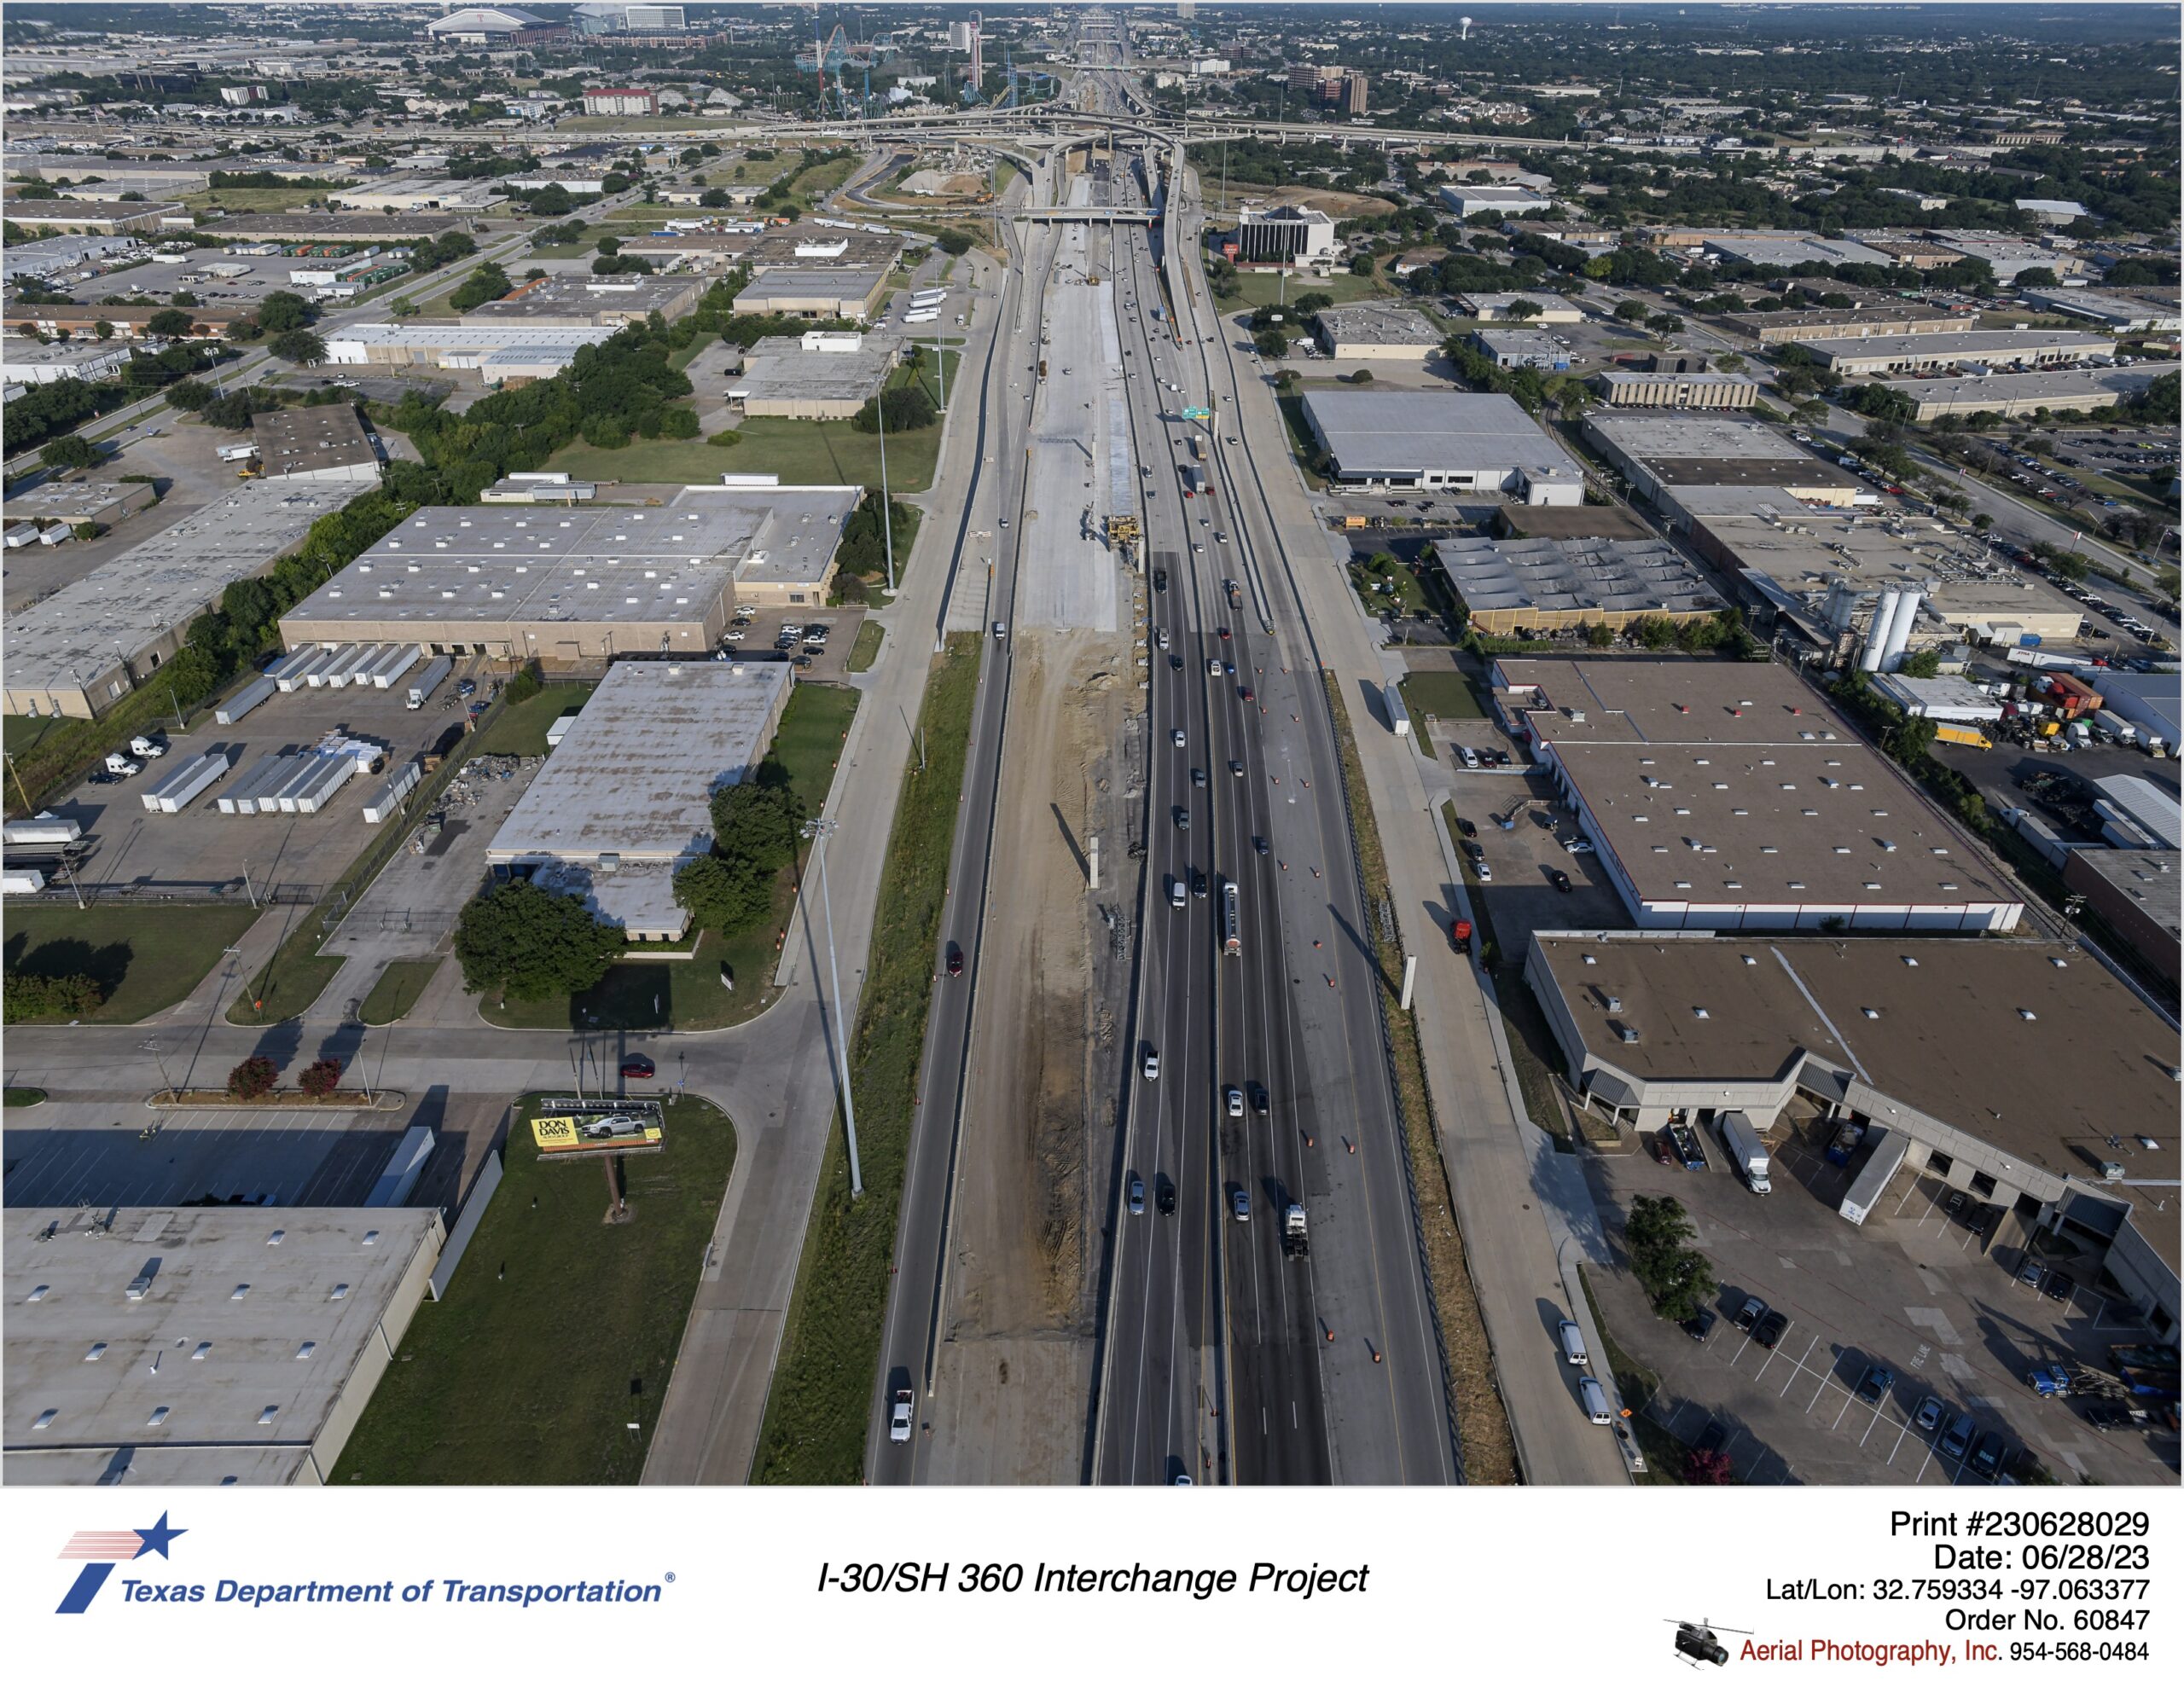 I-30 looking west over Great Southwest Pkwy interchange. Construction of eastbound mainlanes shown in image.